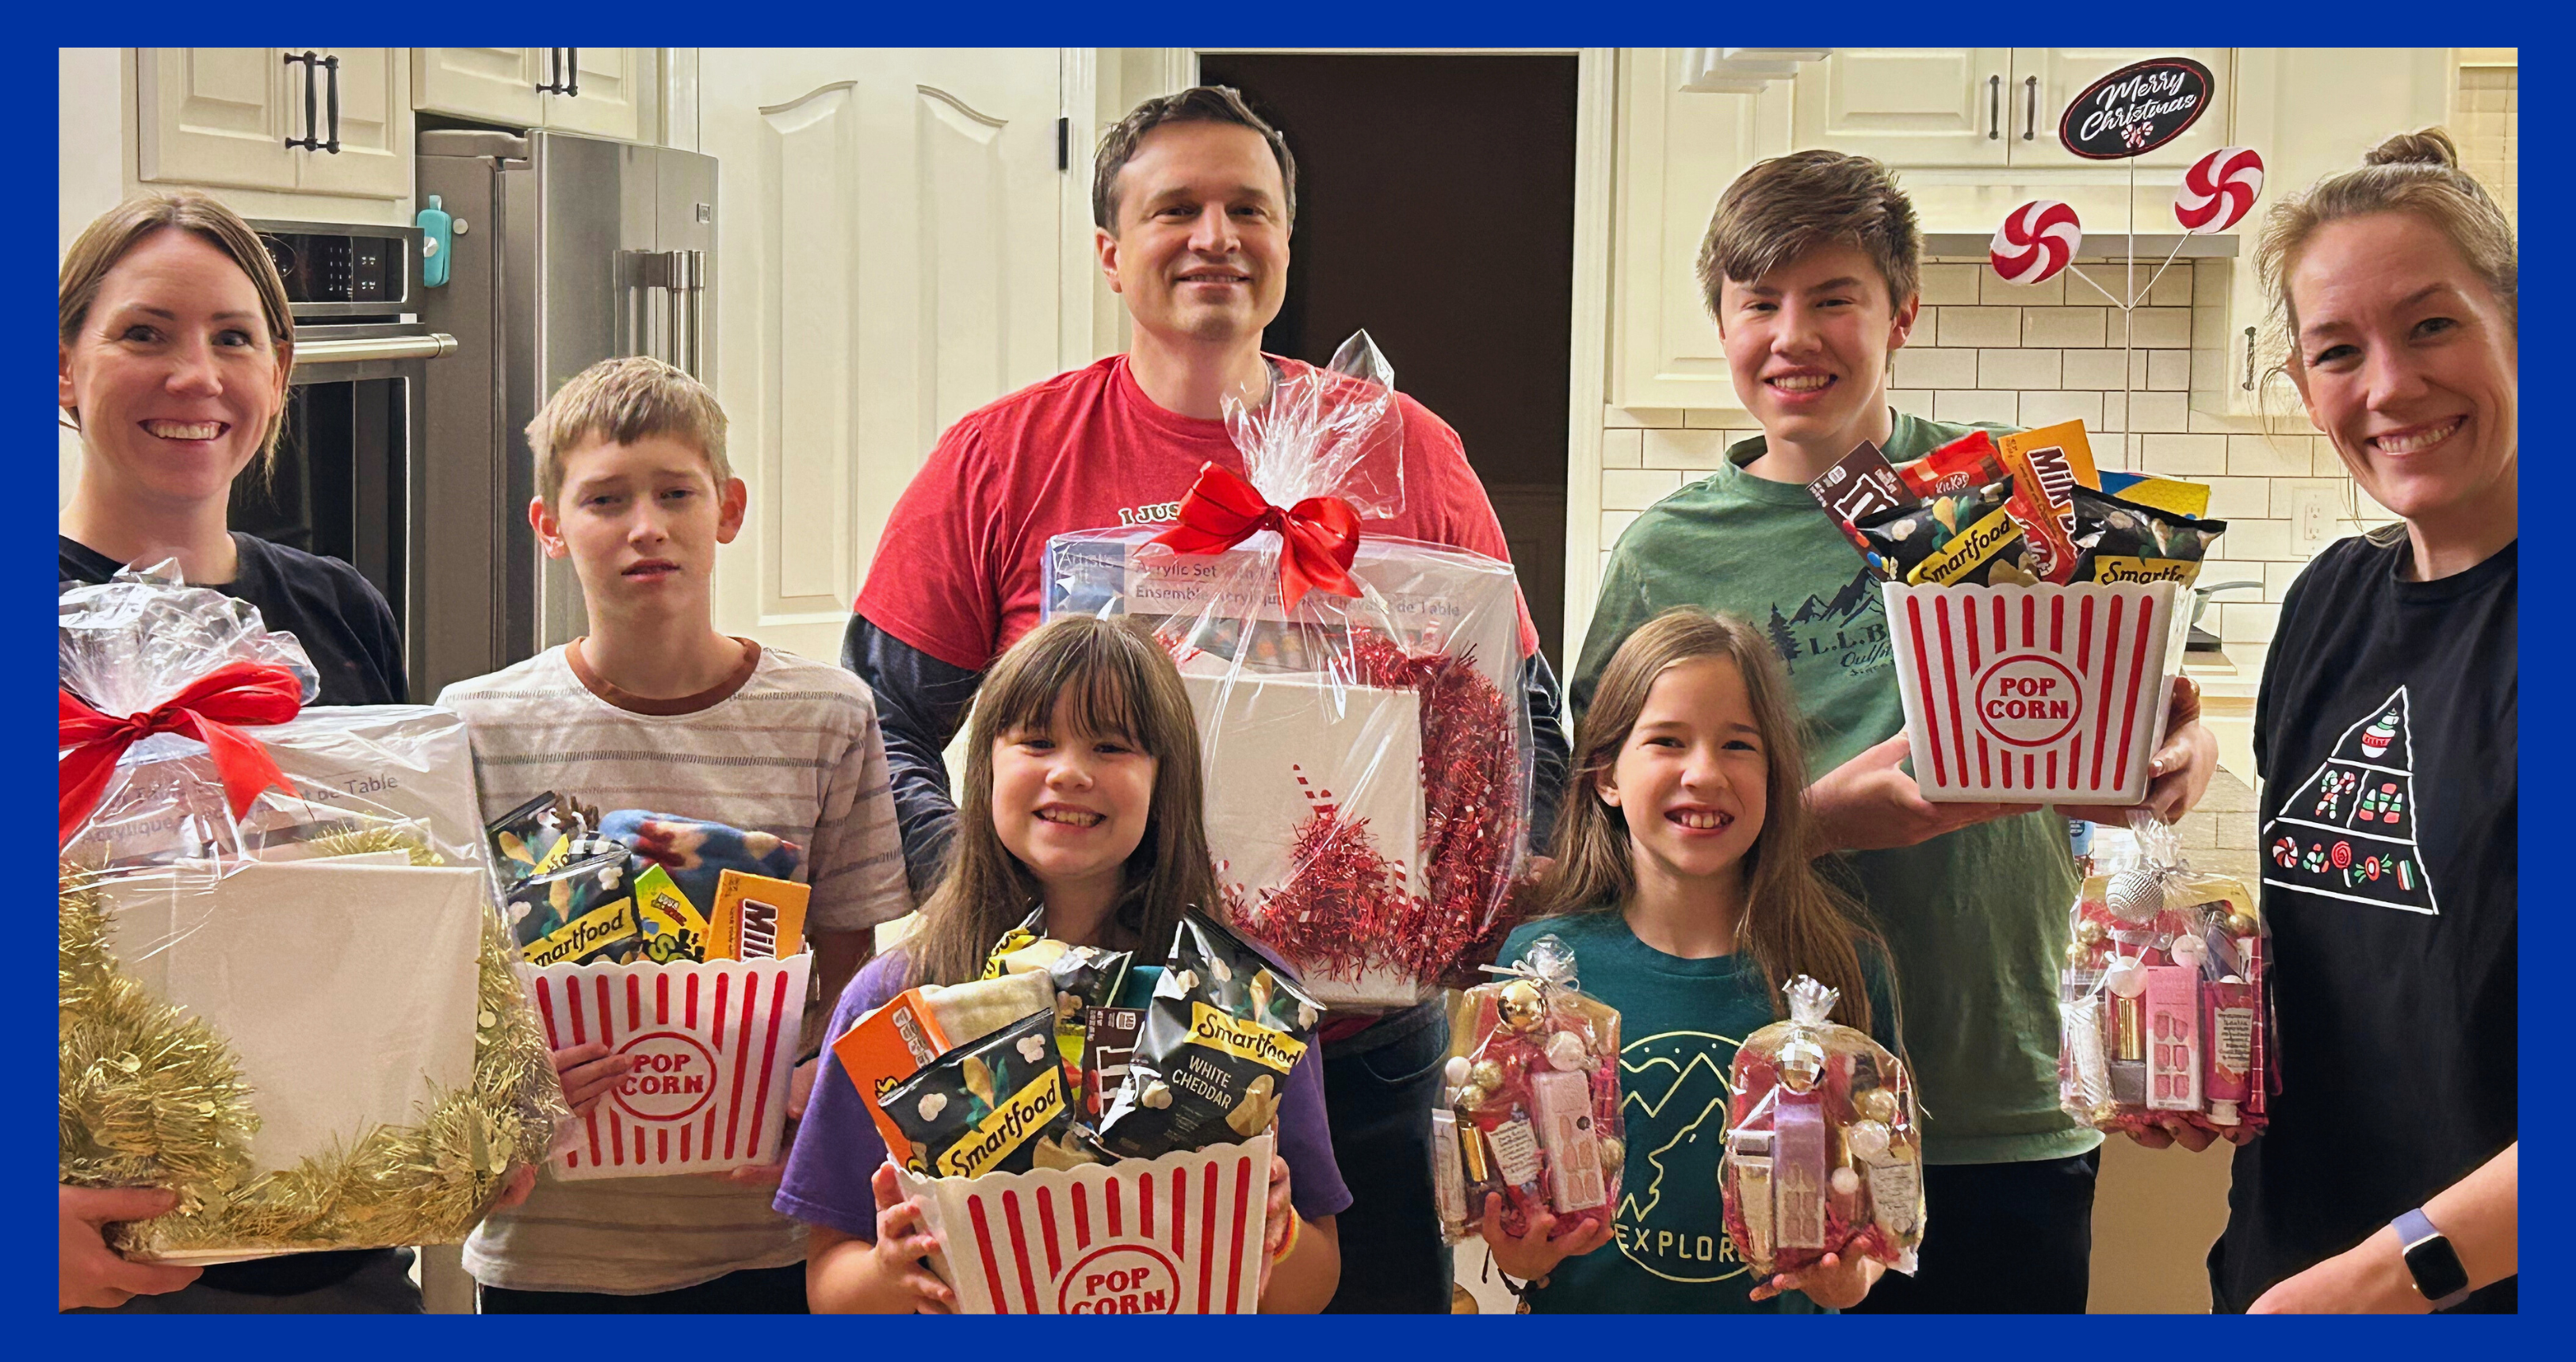 Cassie (R), Amanda (L-sister), Rob (brother-in-law), and family stand with Christmas gift baskets to support a local women's shelter.